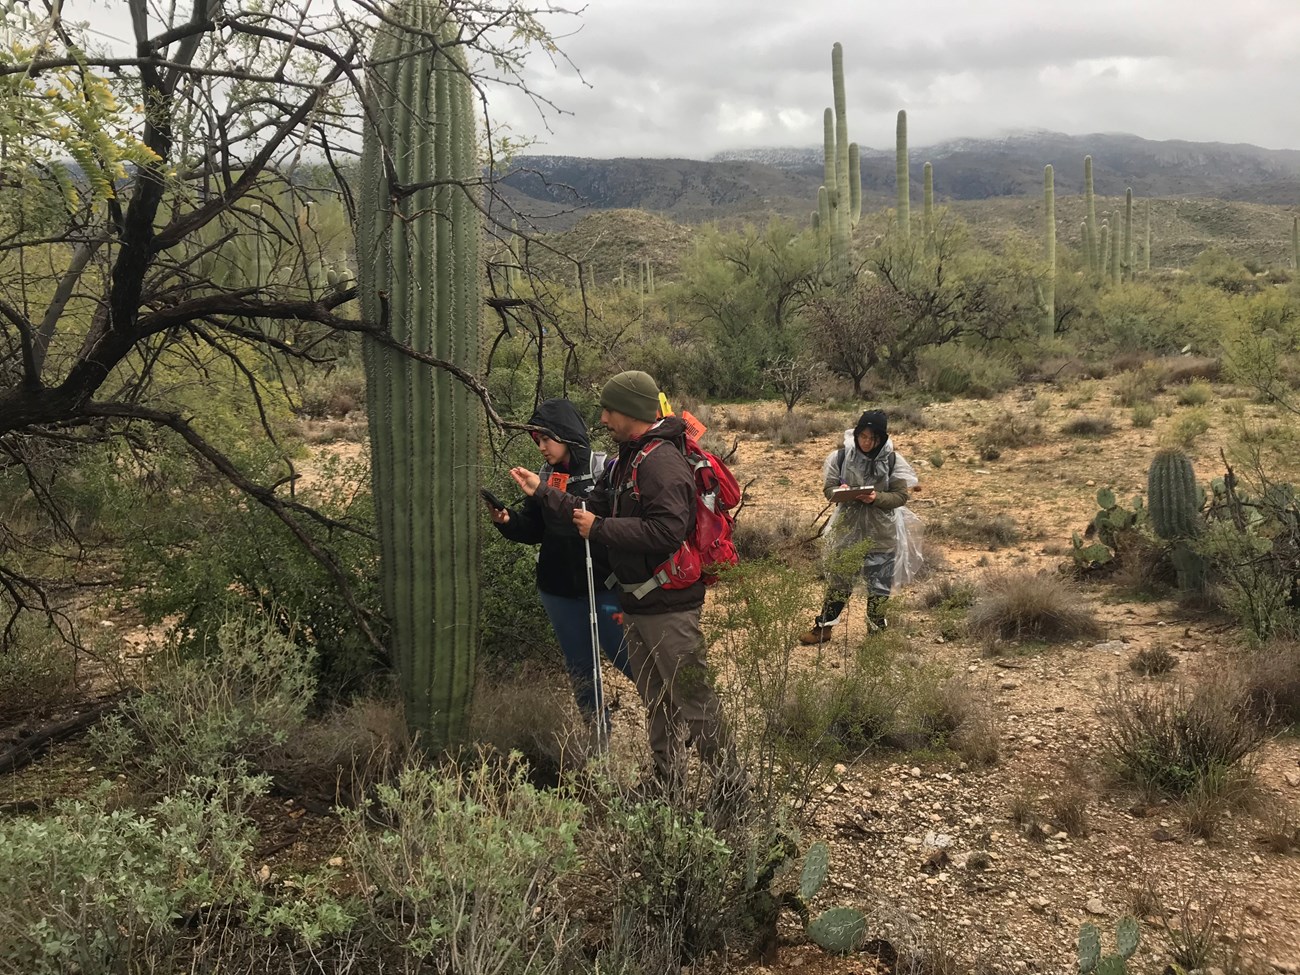 Group of people finding the coordinates of a saguaro, flagging it, and writing down data